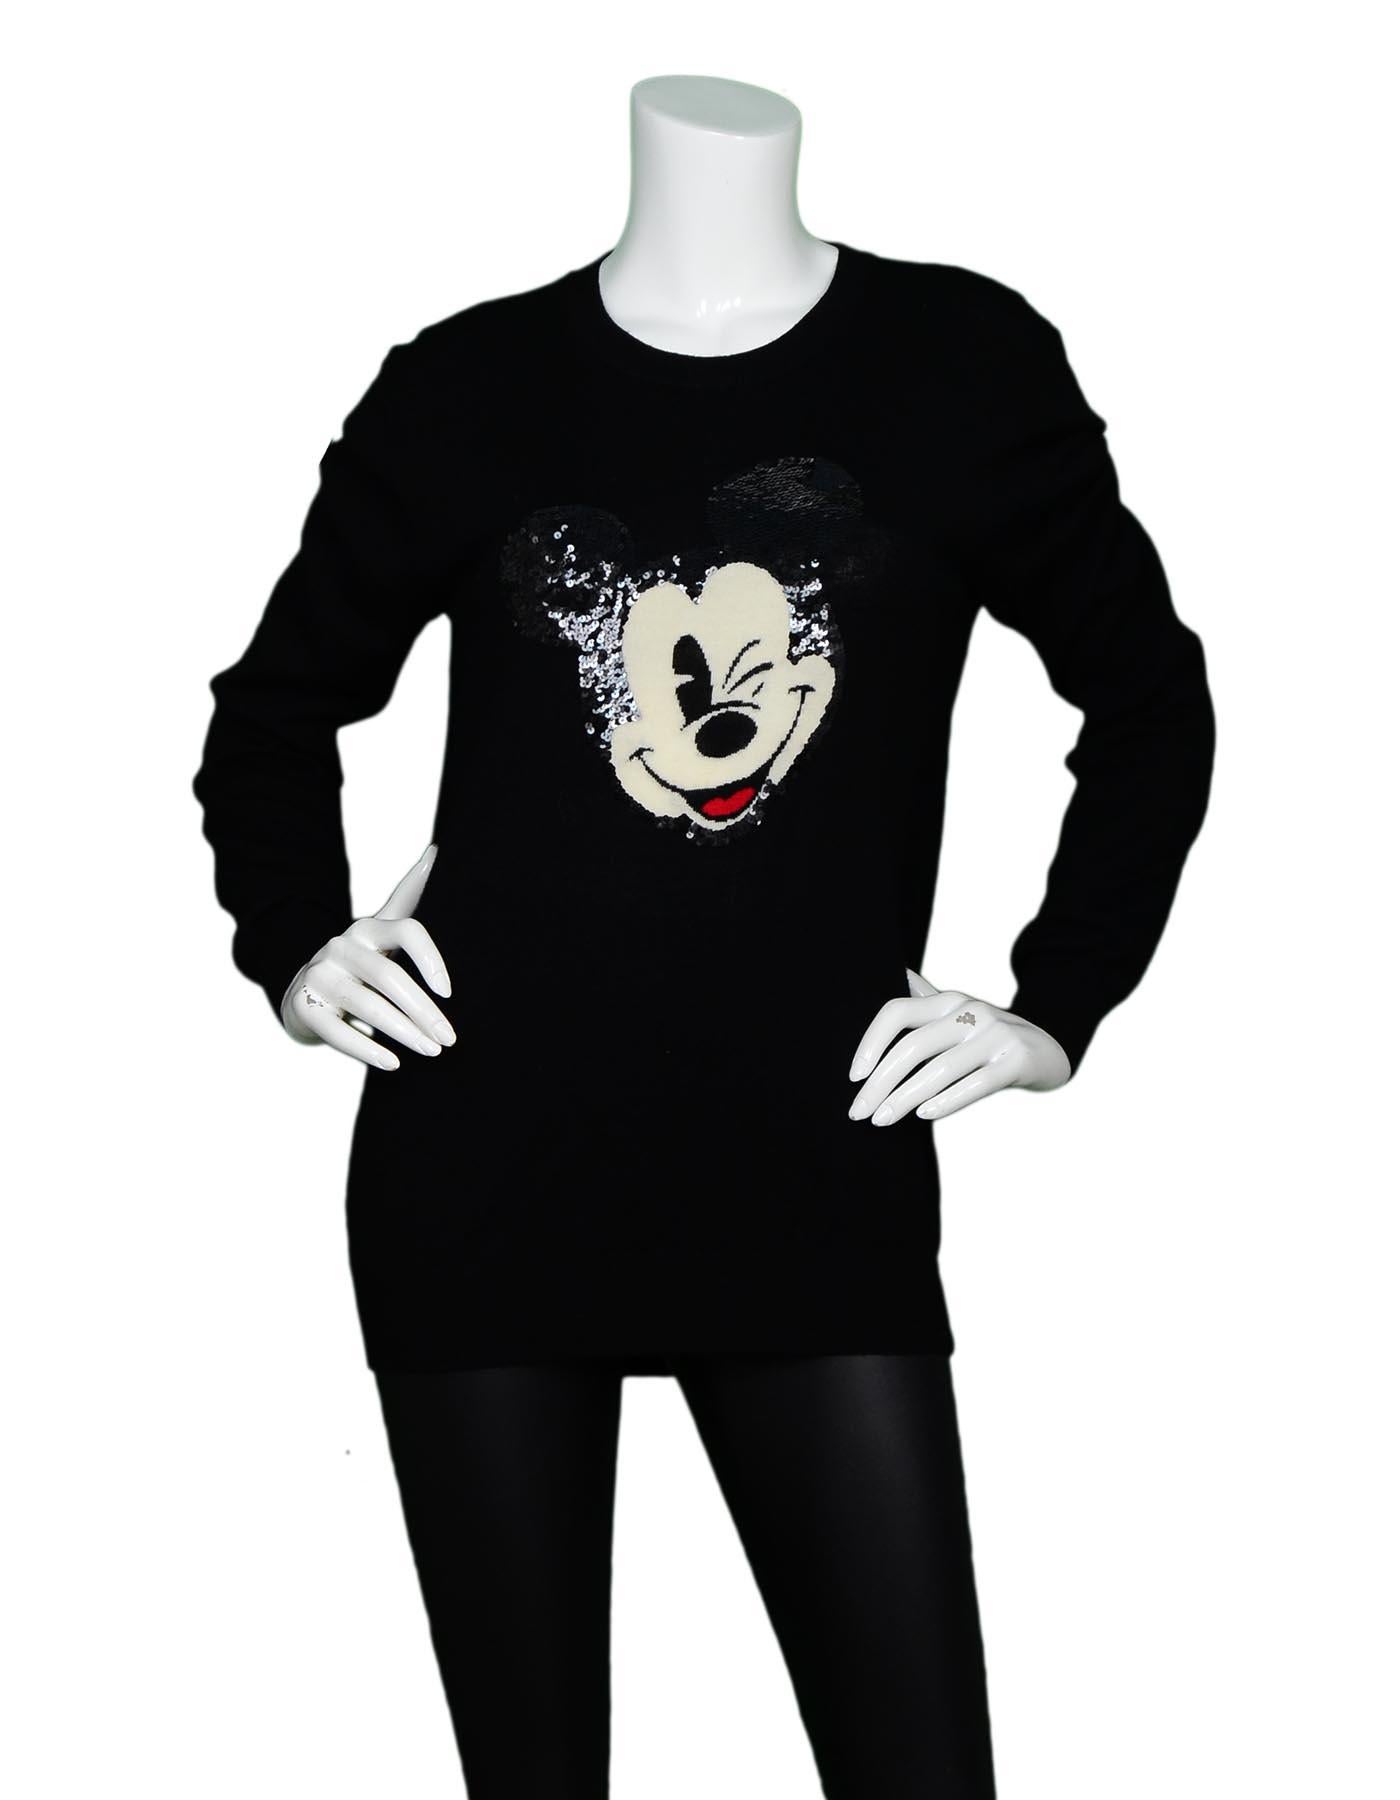 Markus Lupfer Wool Longsleeve Sequin Mickey Sweater Sz M

Made In:  China
Color: Back
Materials: 100% merino wool
Opening/Closure: Pull over
Overall Condition: Excellent pre-owned condition 
Measurements: 
Shoulder To Shoulder:   17